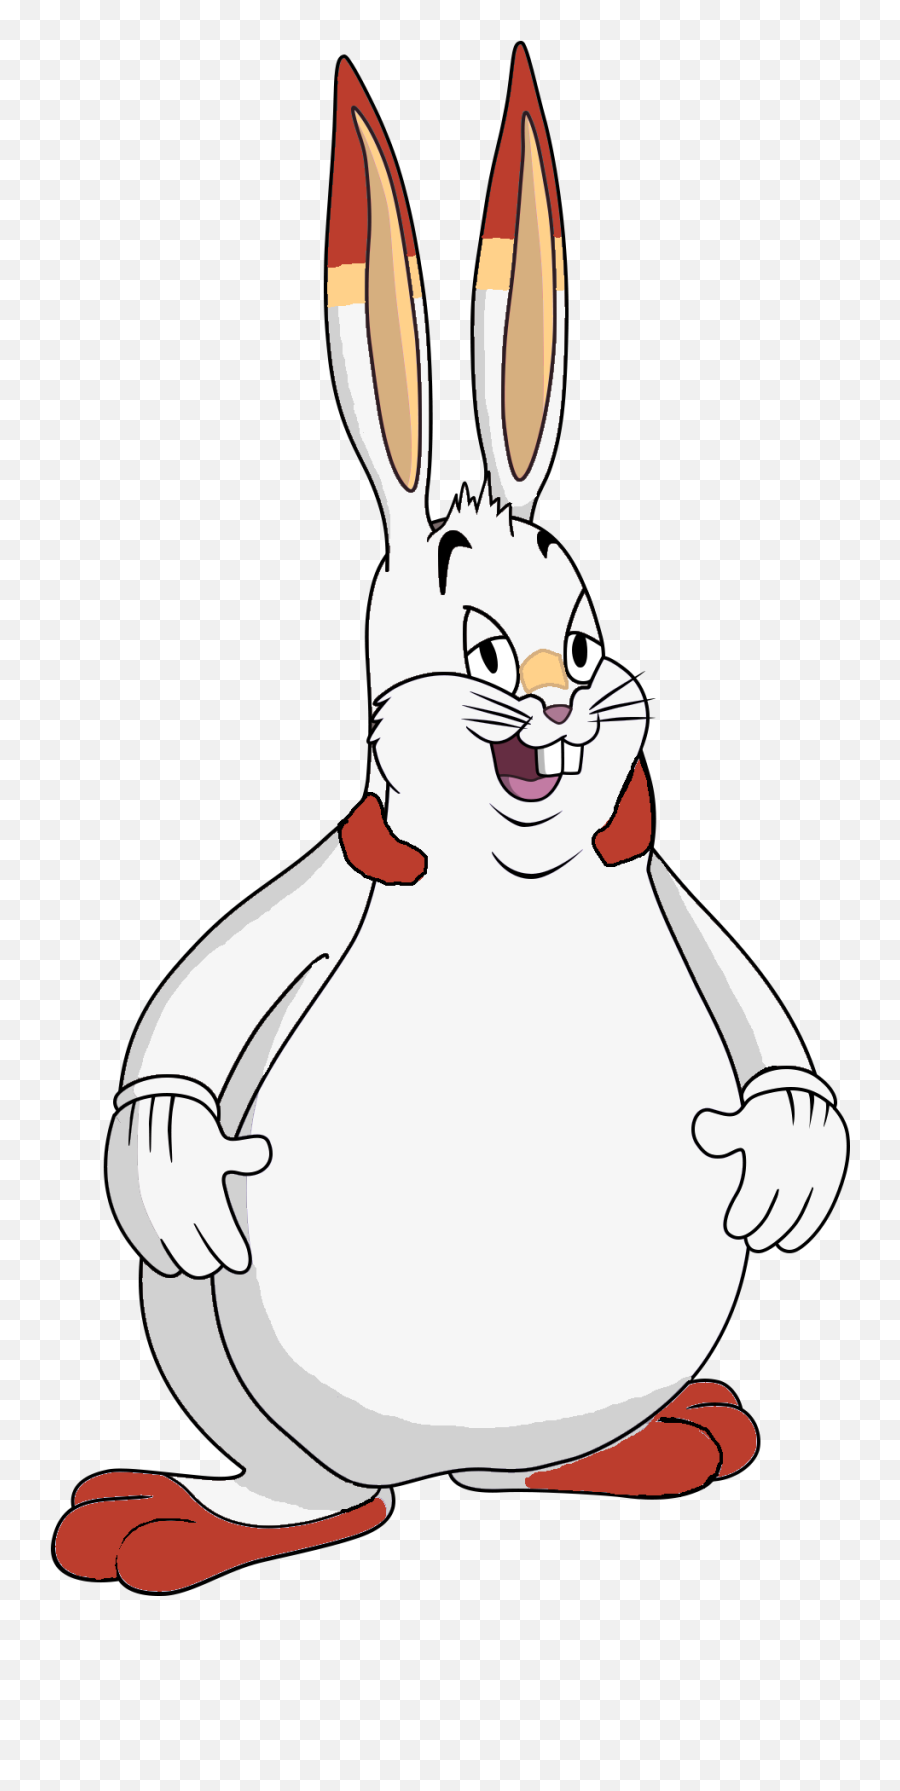 Searching For Posts With The Image Hash - Cartoon Png,Big Chungus Png